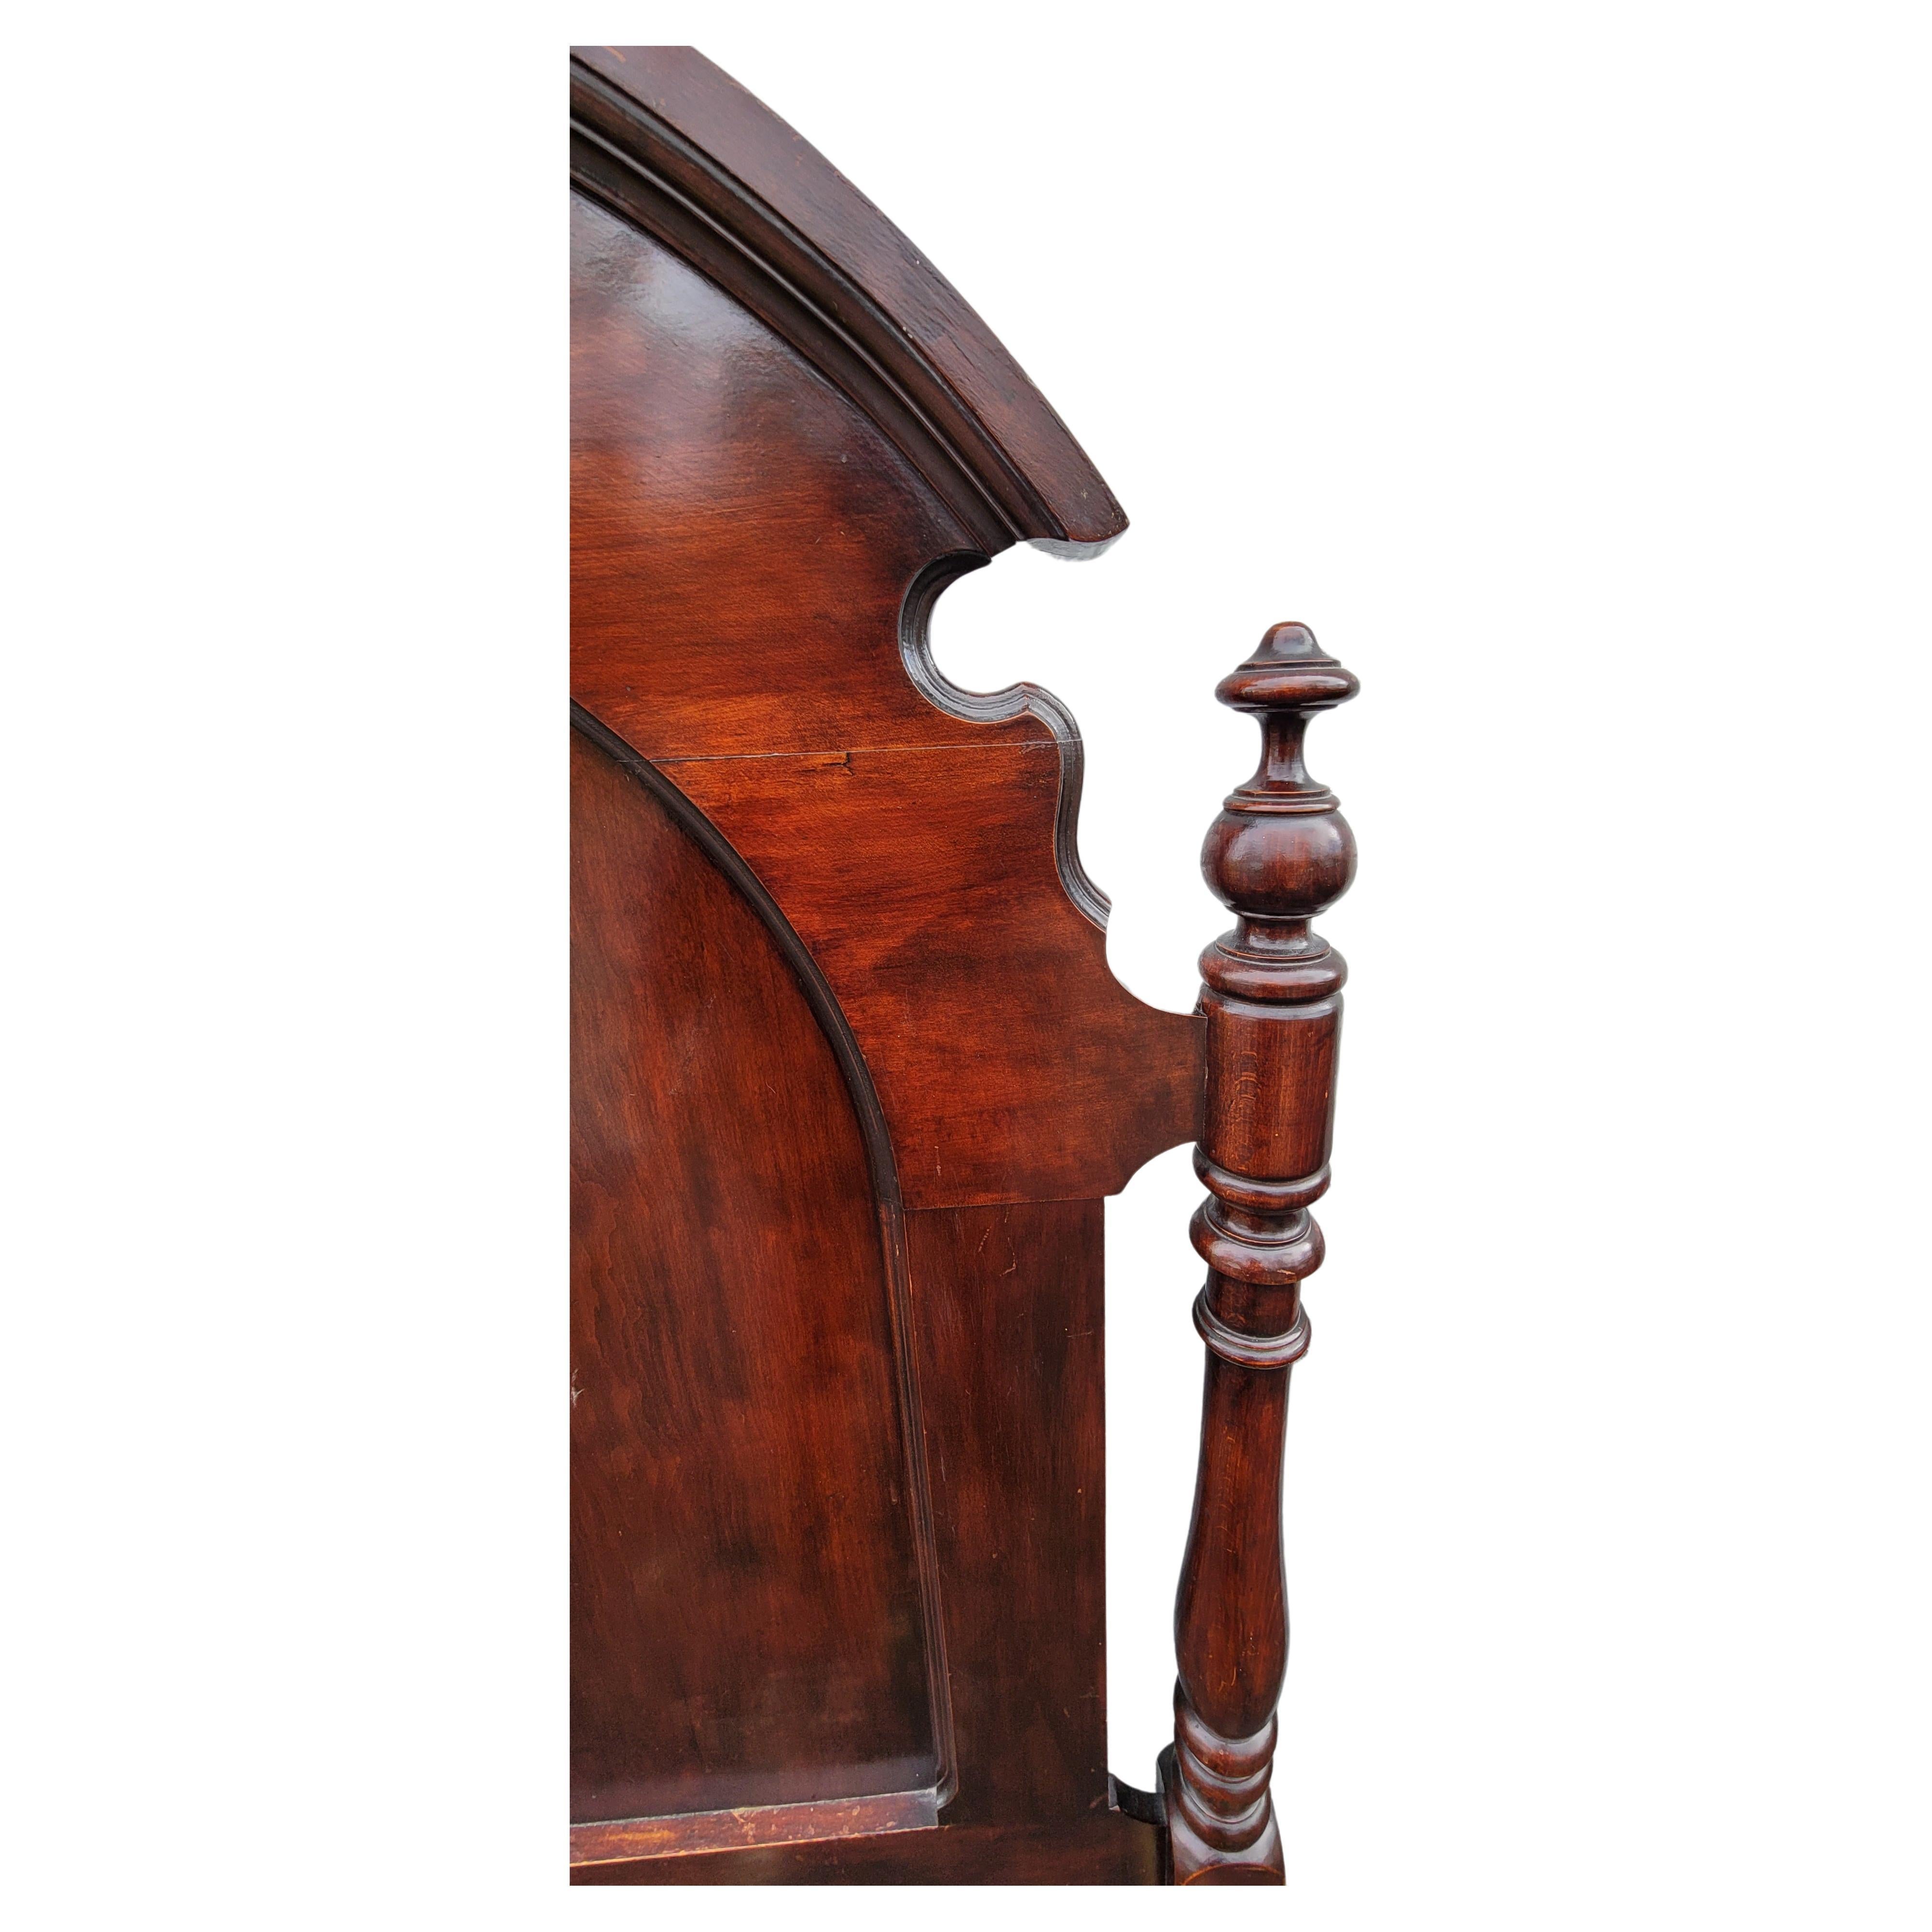 A rare pair 1860s Victorian Mahogany High Back head board Twin Bedsteads. Good antique condition.
Measures 41